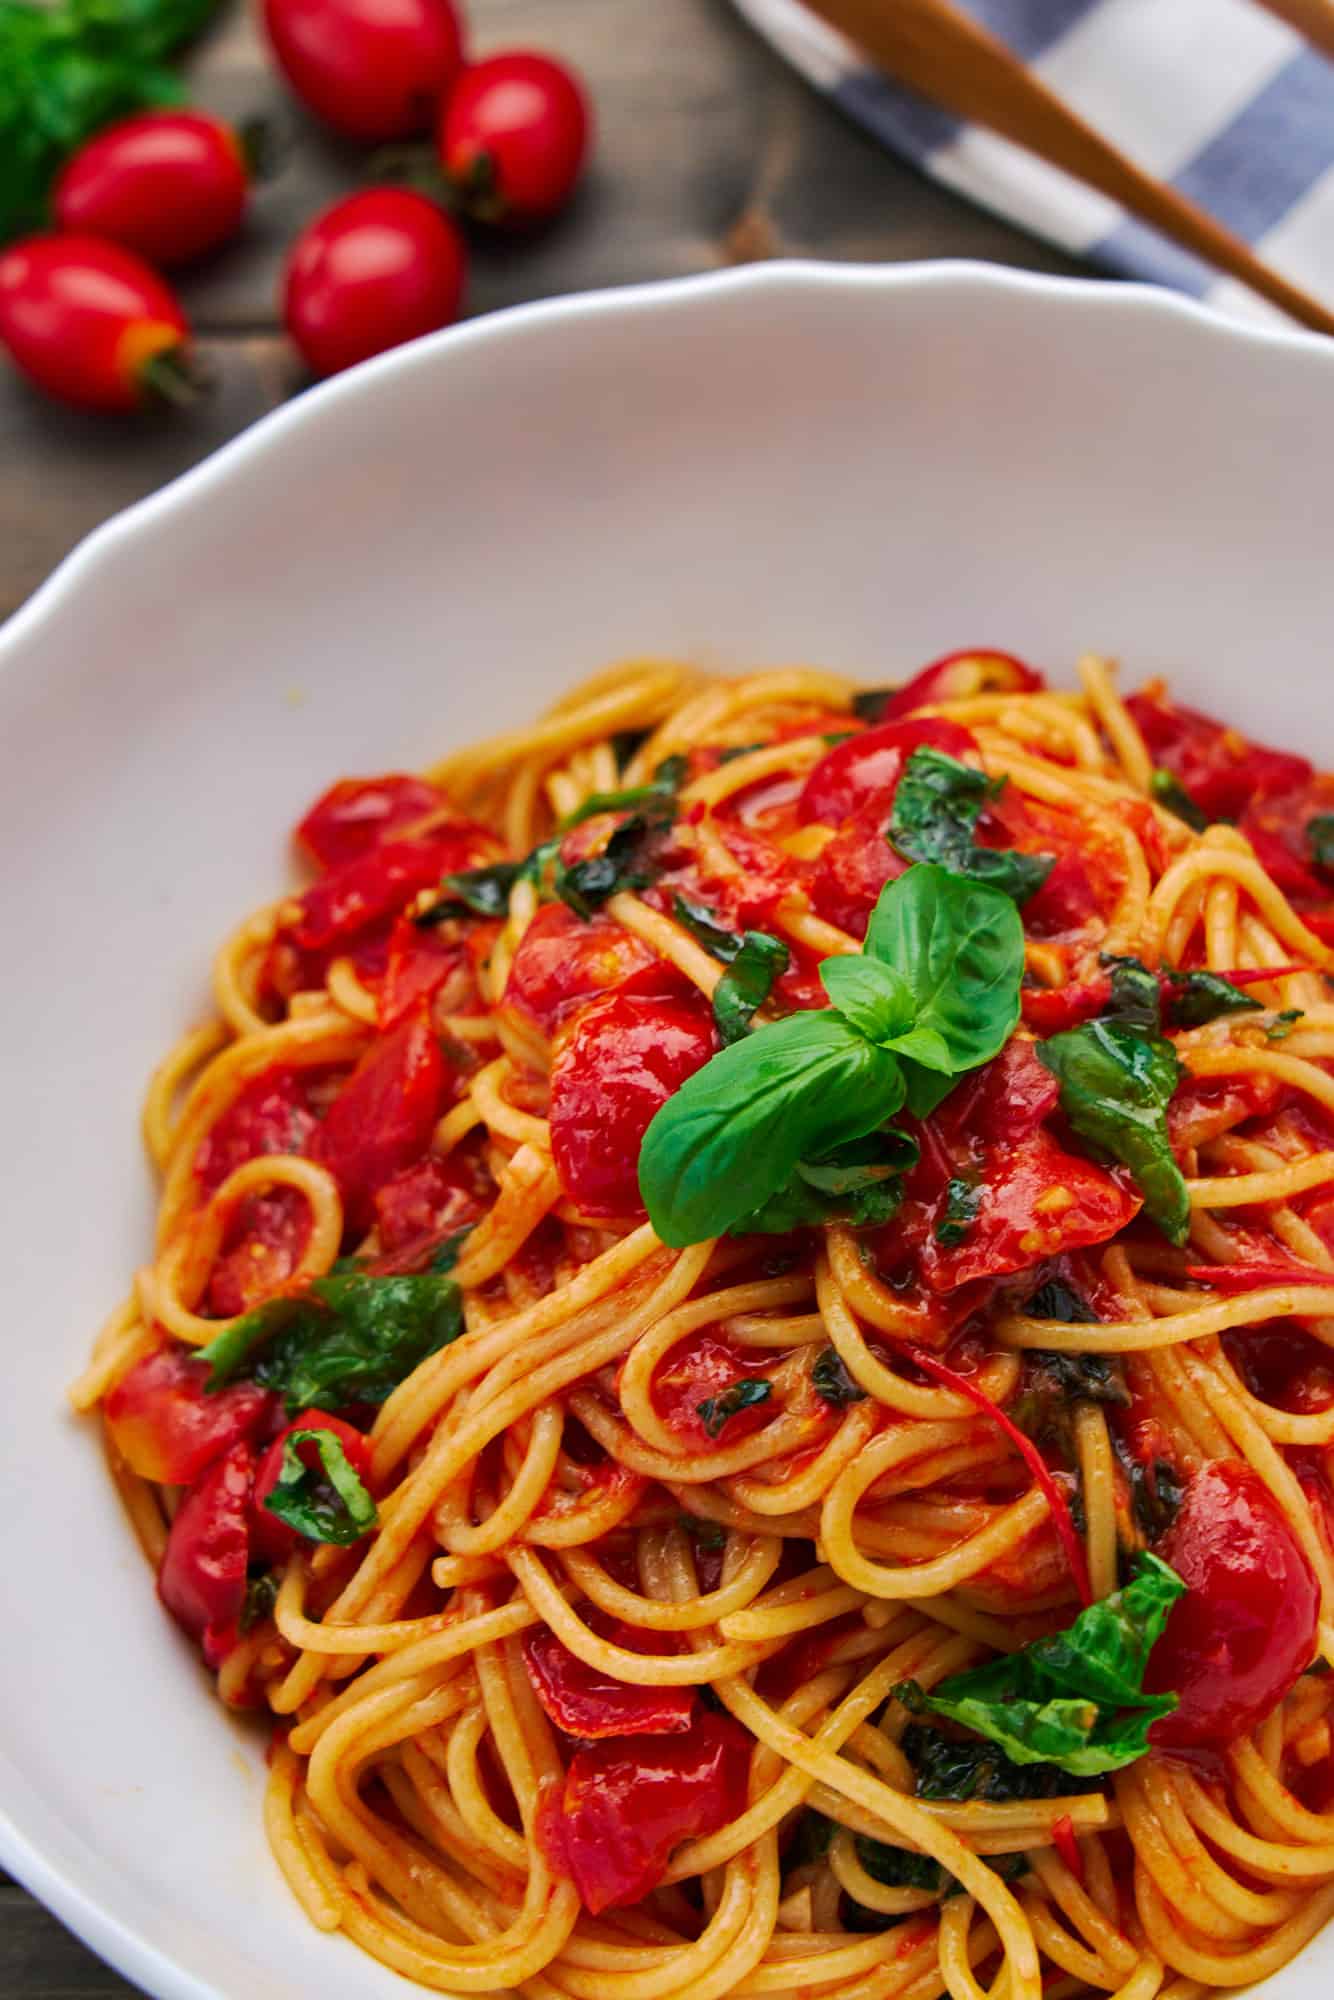 Al dente spaghetti paired with vibrant pomodoro sauce made with sun ripened tomatoes and fresh basil. It's a classic Italian summer pasta.